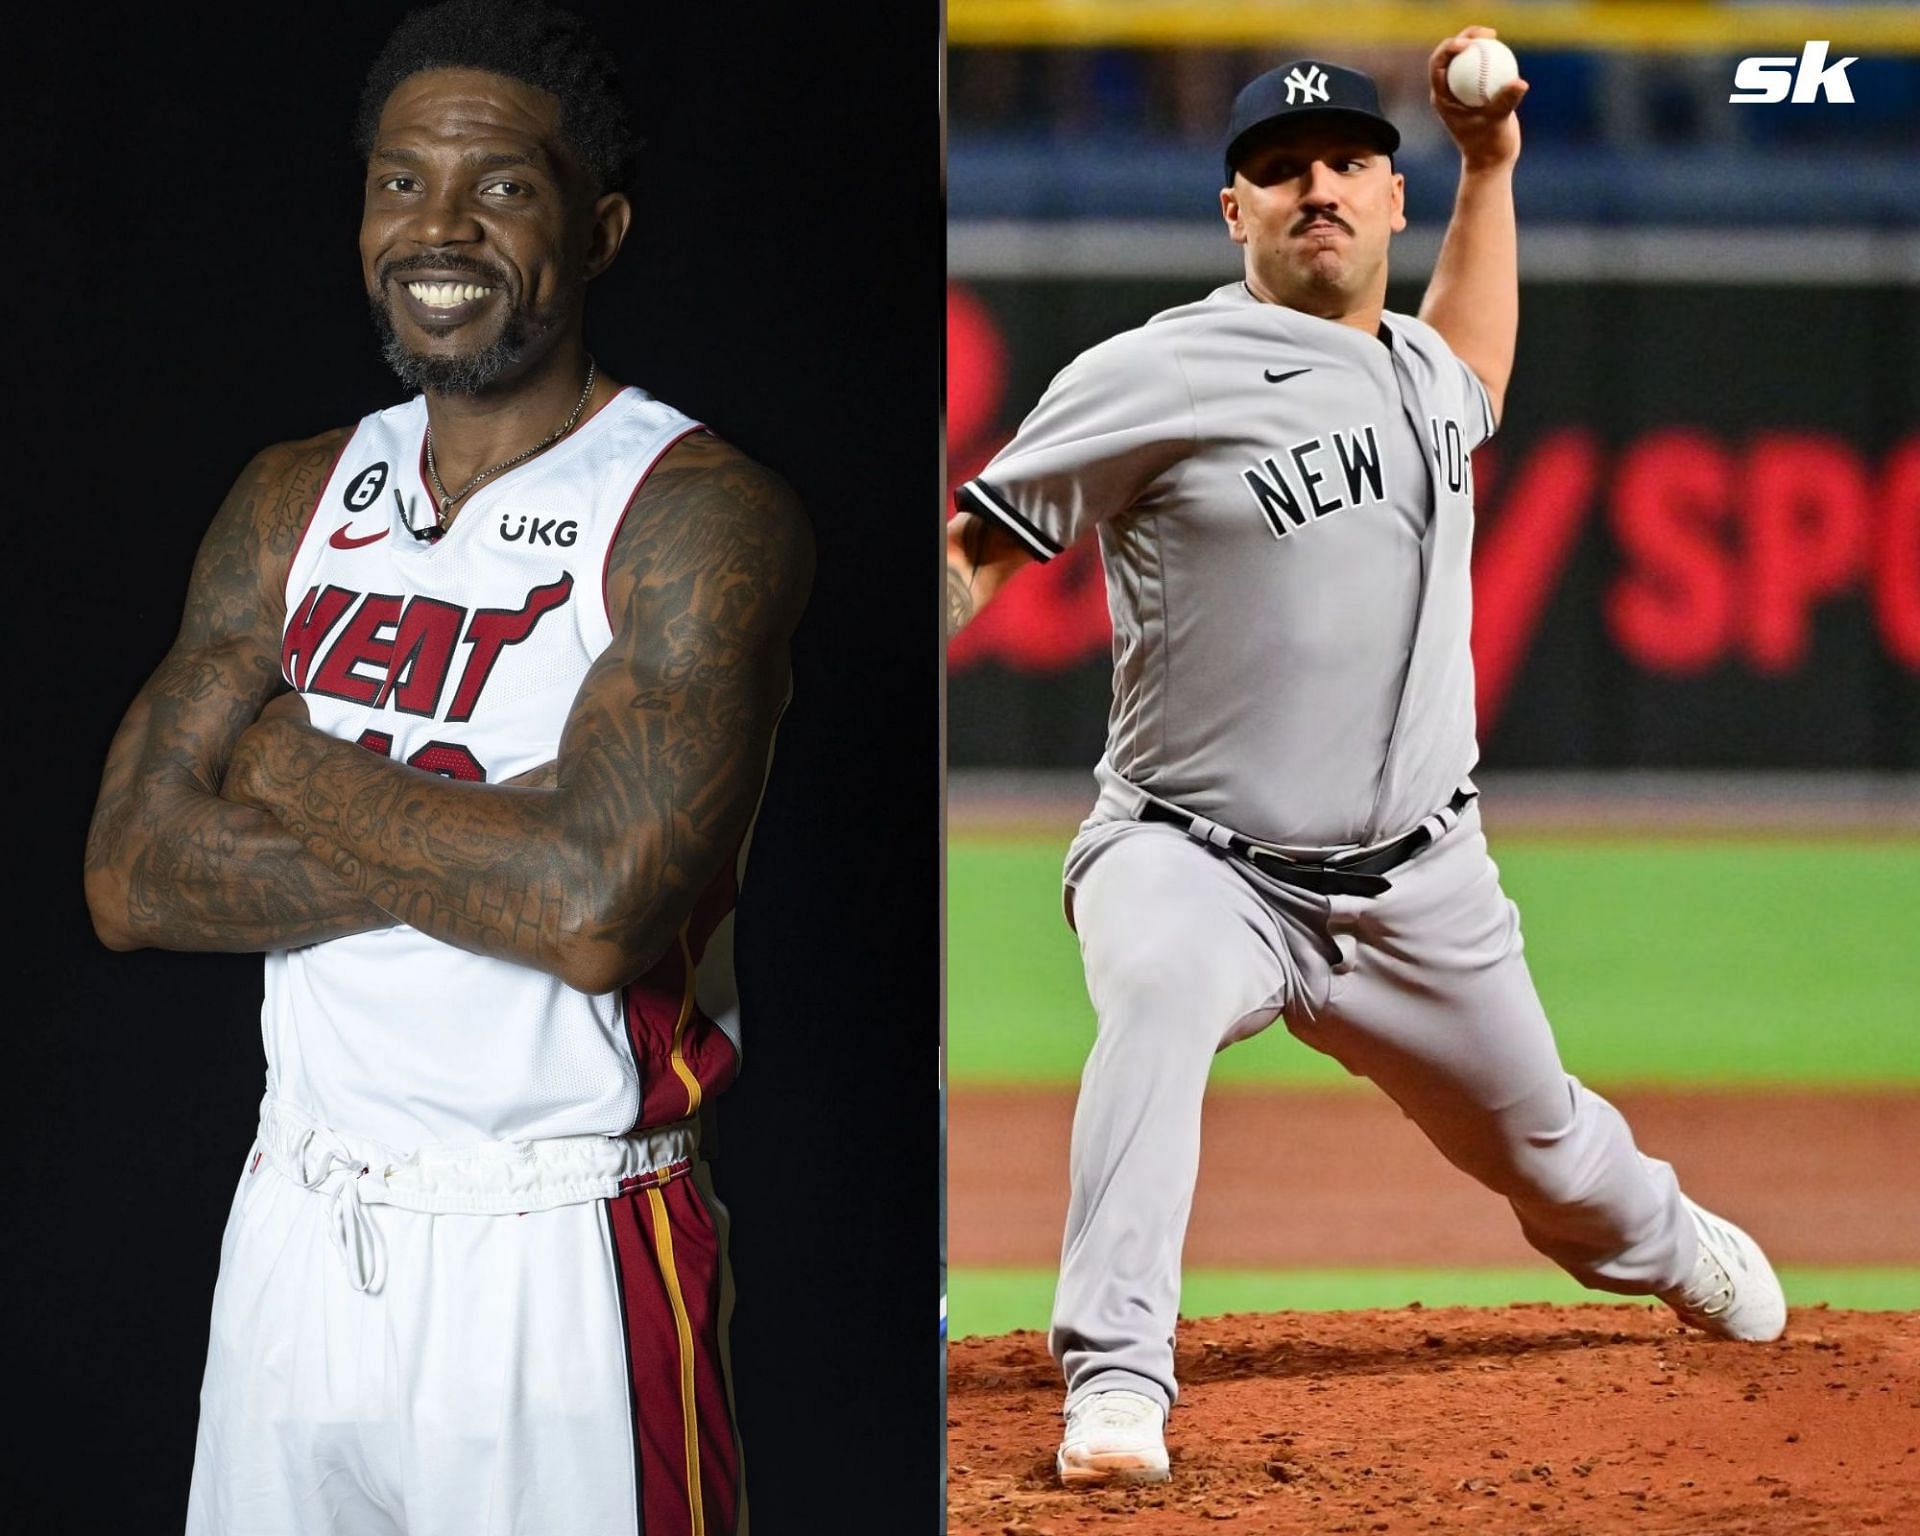 New York Yankees All-Star Nestor Cortes had a stellar fanboy moment with Miami Heat legend Udonis Haslem